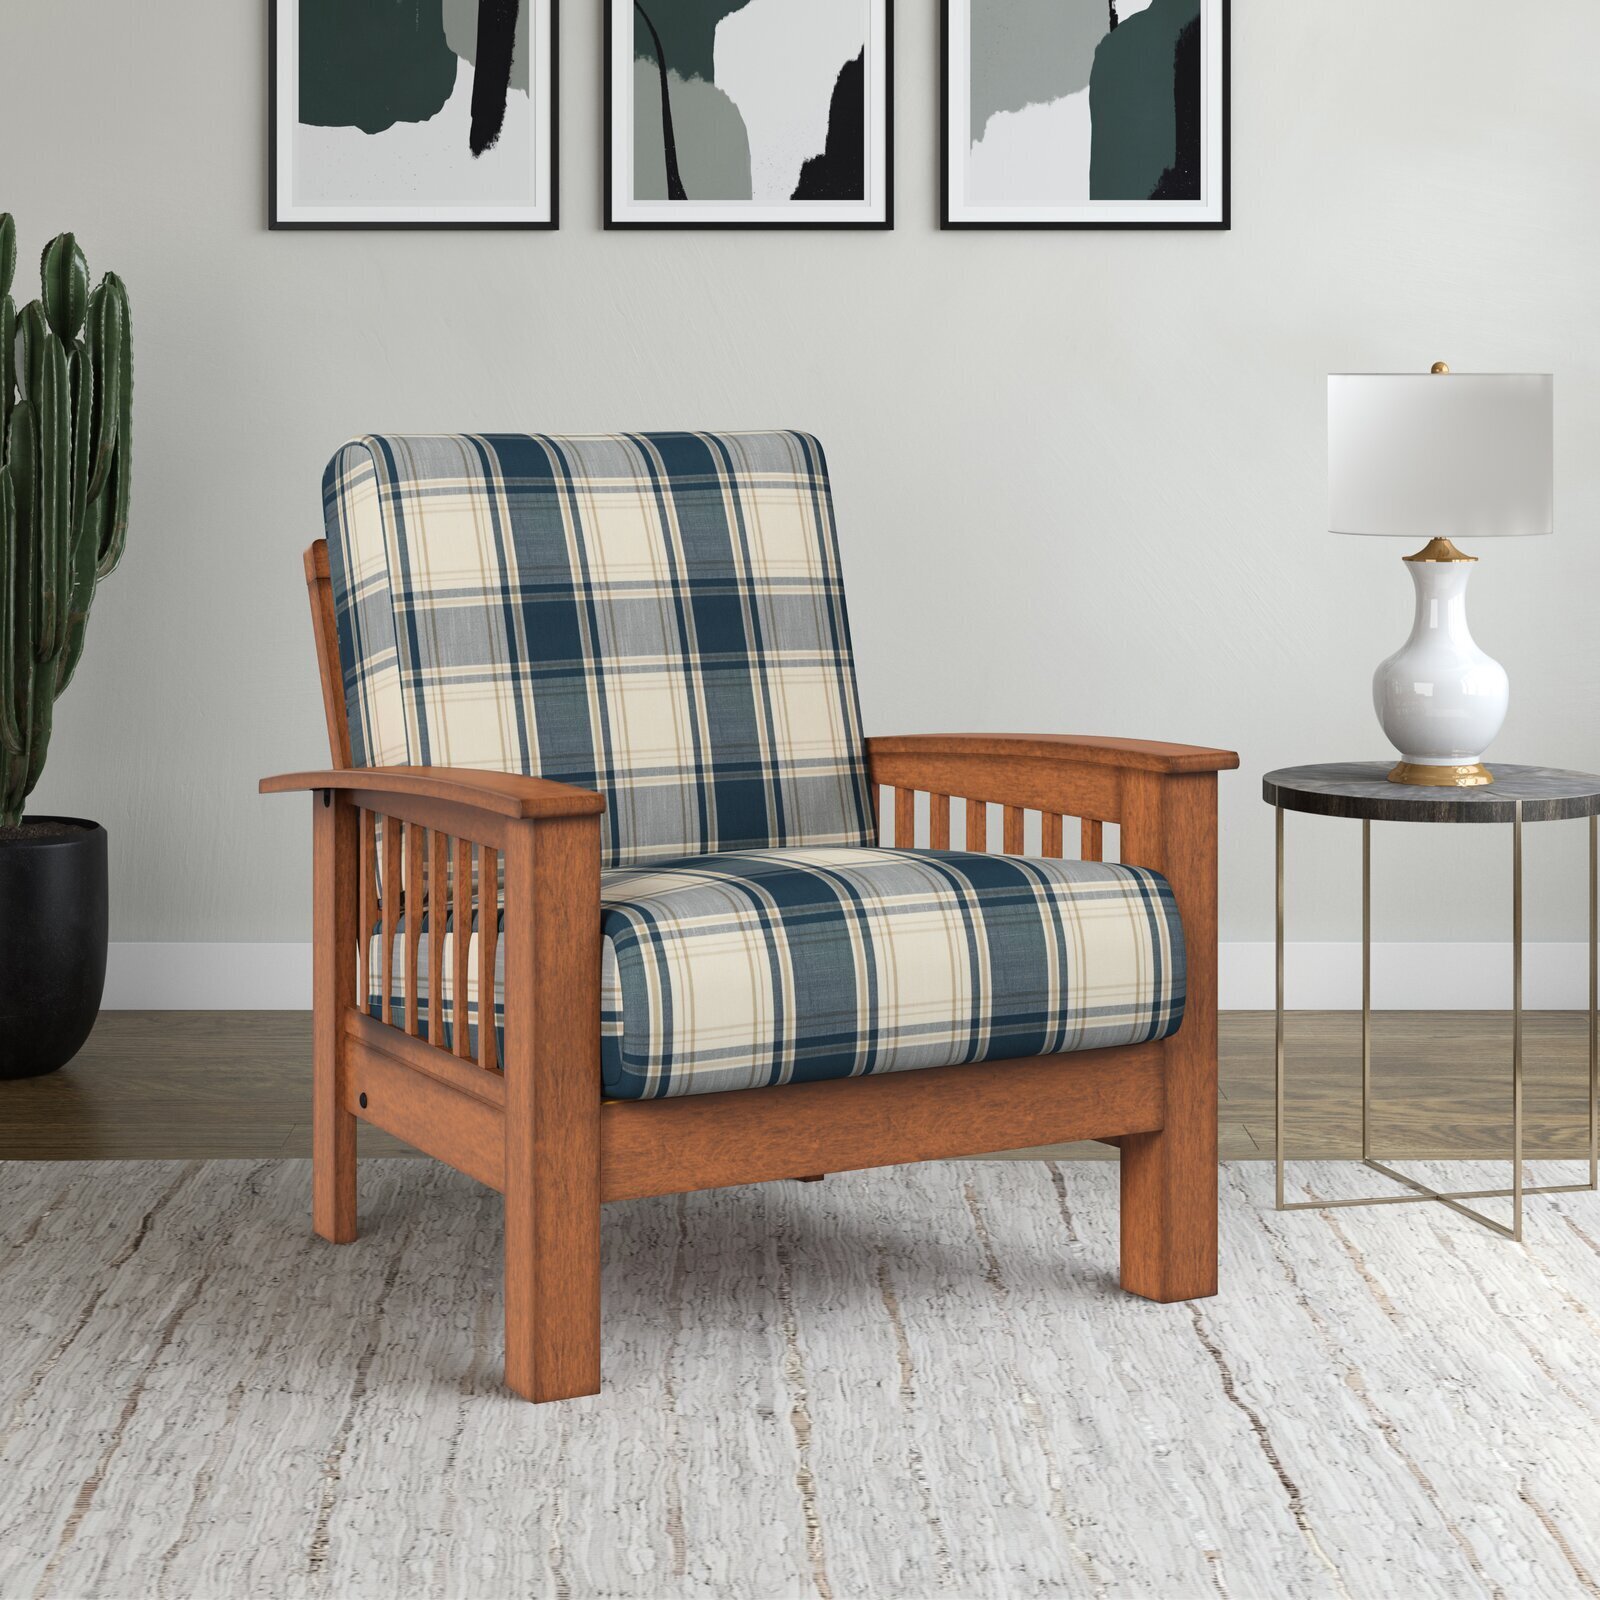 Mission style armchair with a pattern